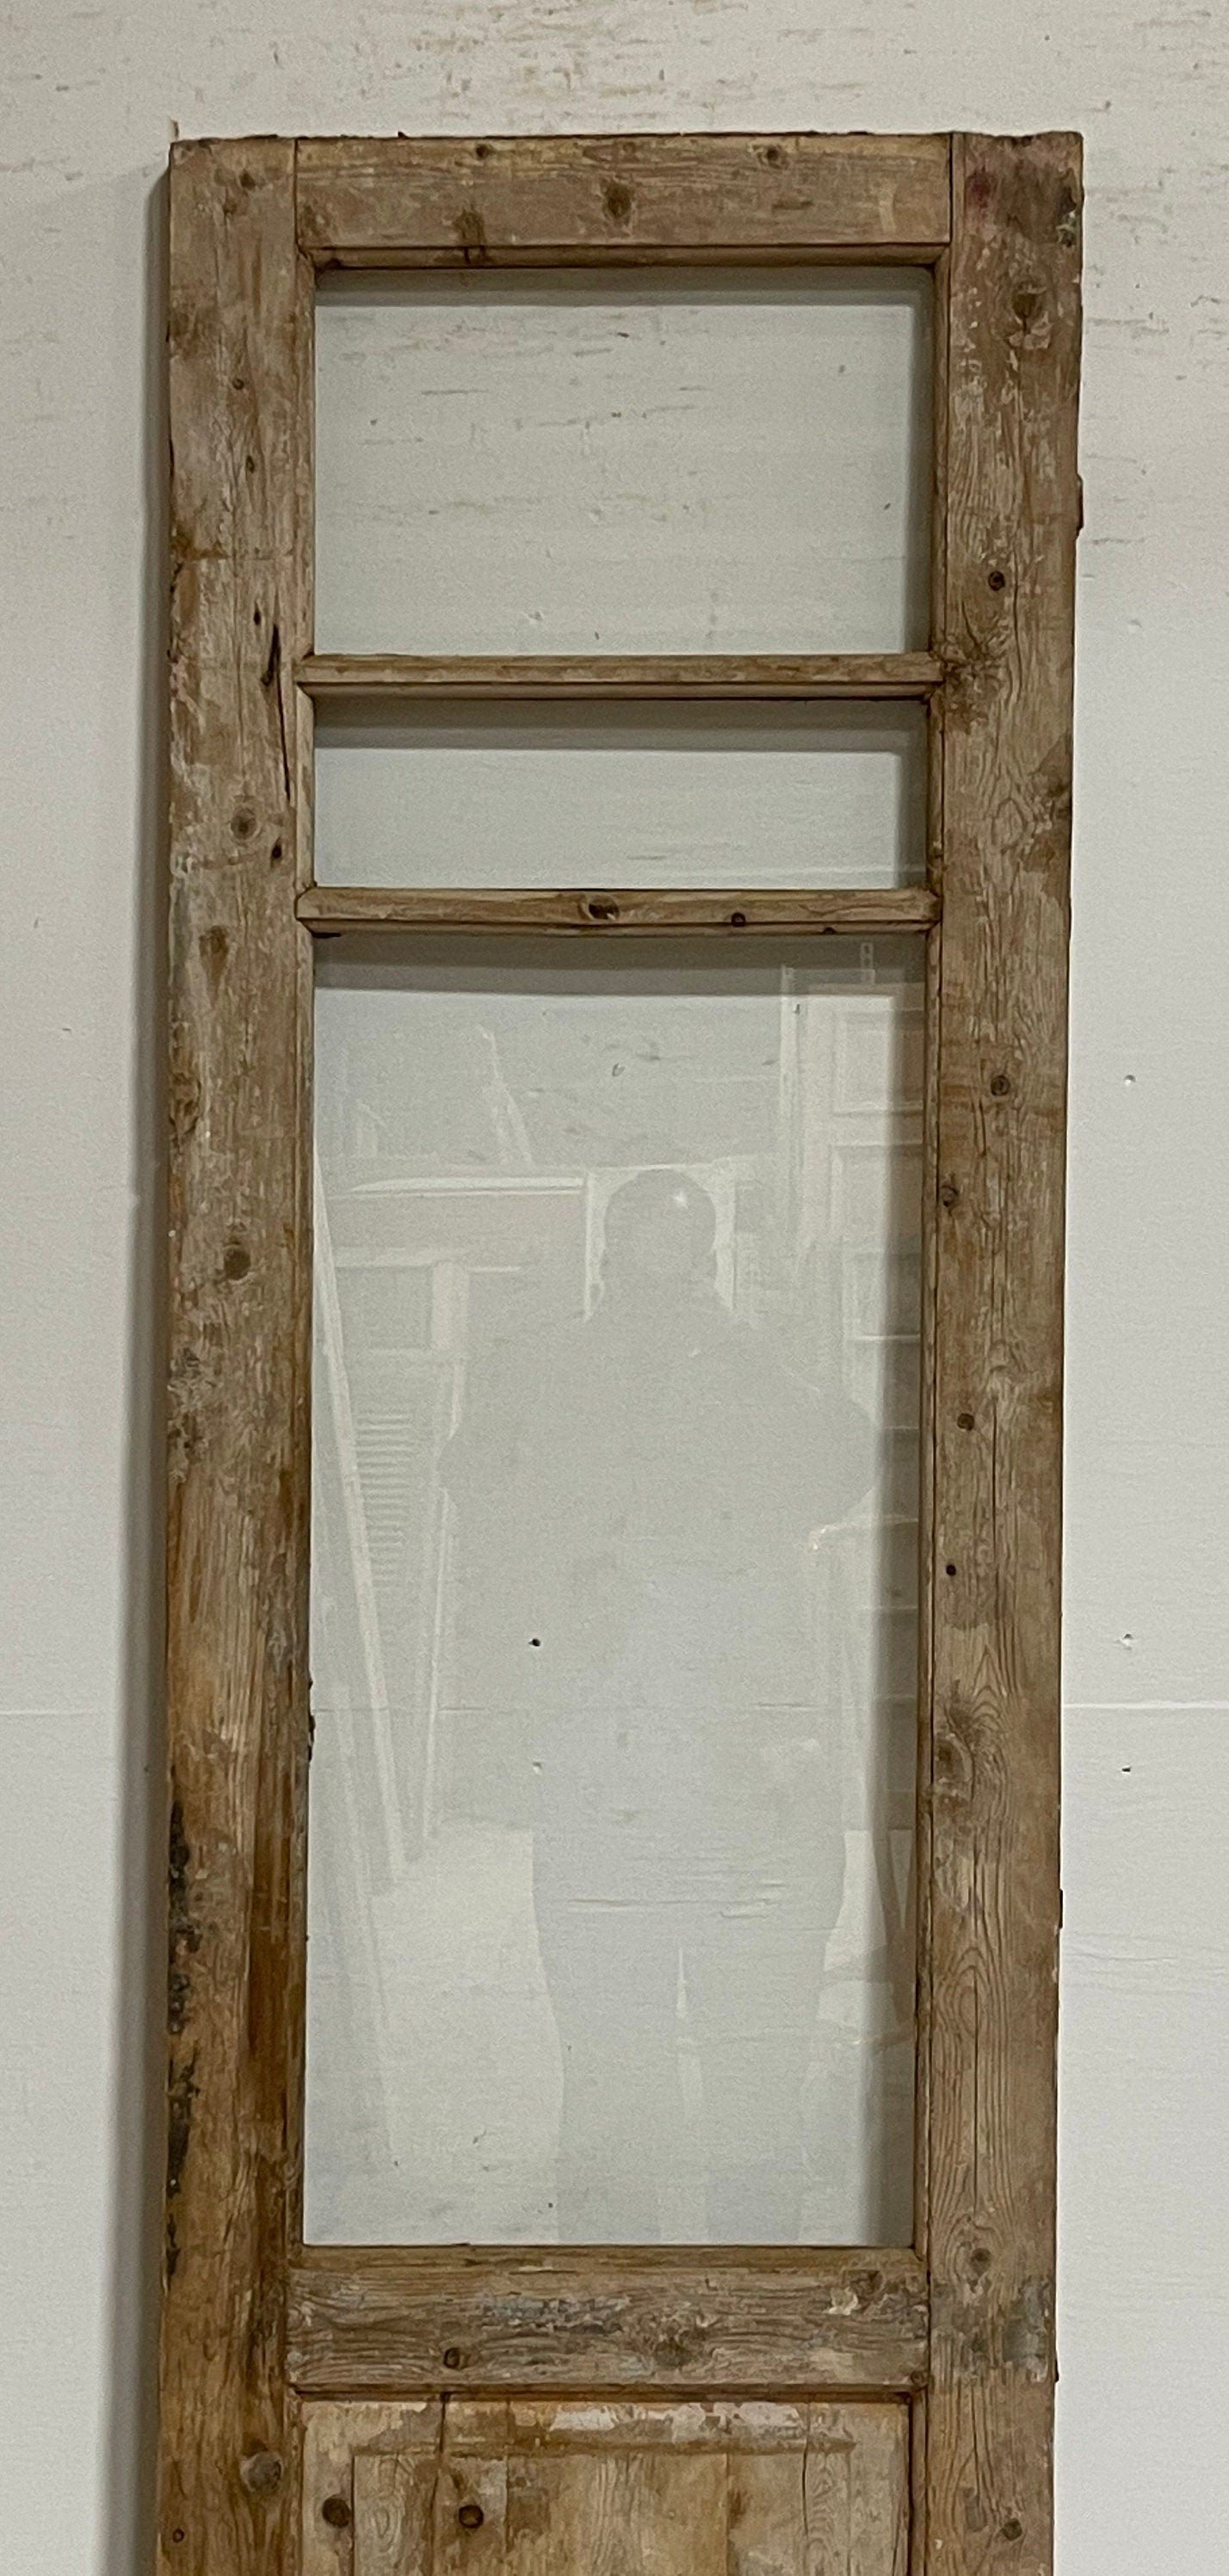 Antique French panel door with glass (89x23.5) G1399s